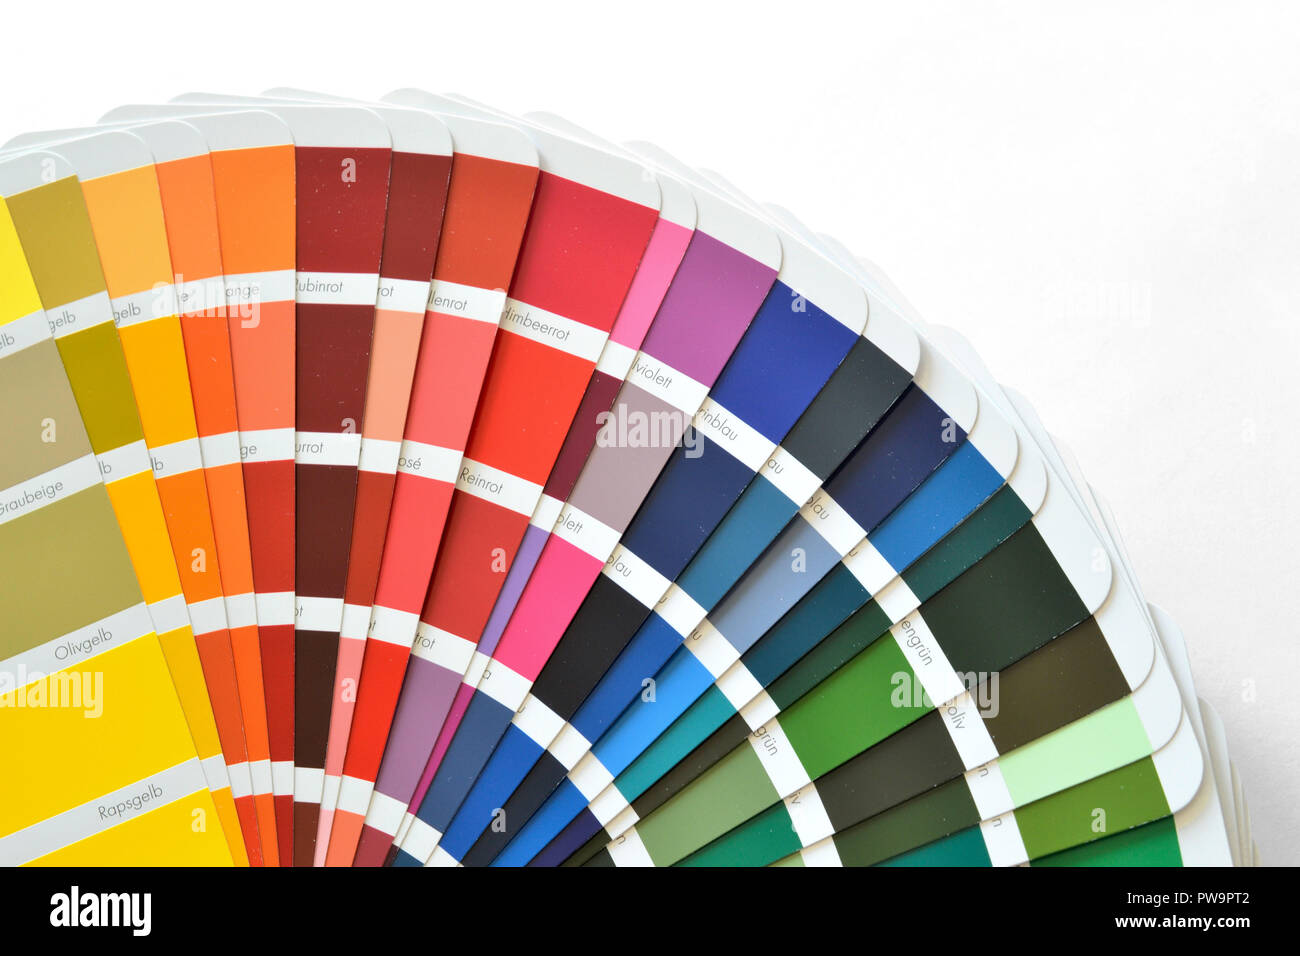 open color fan colorful Living room design Stock Photo